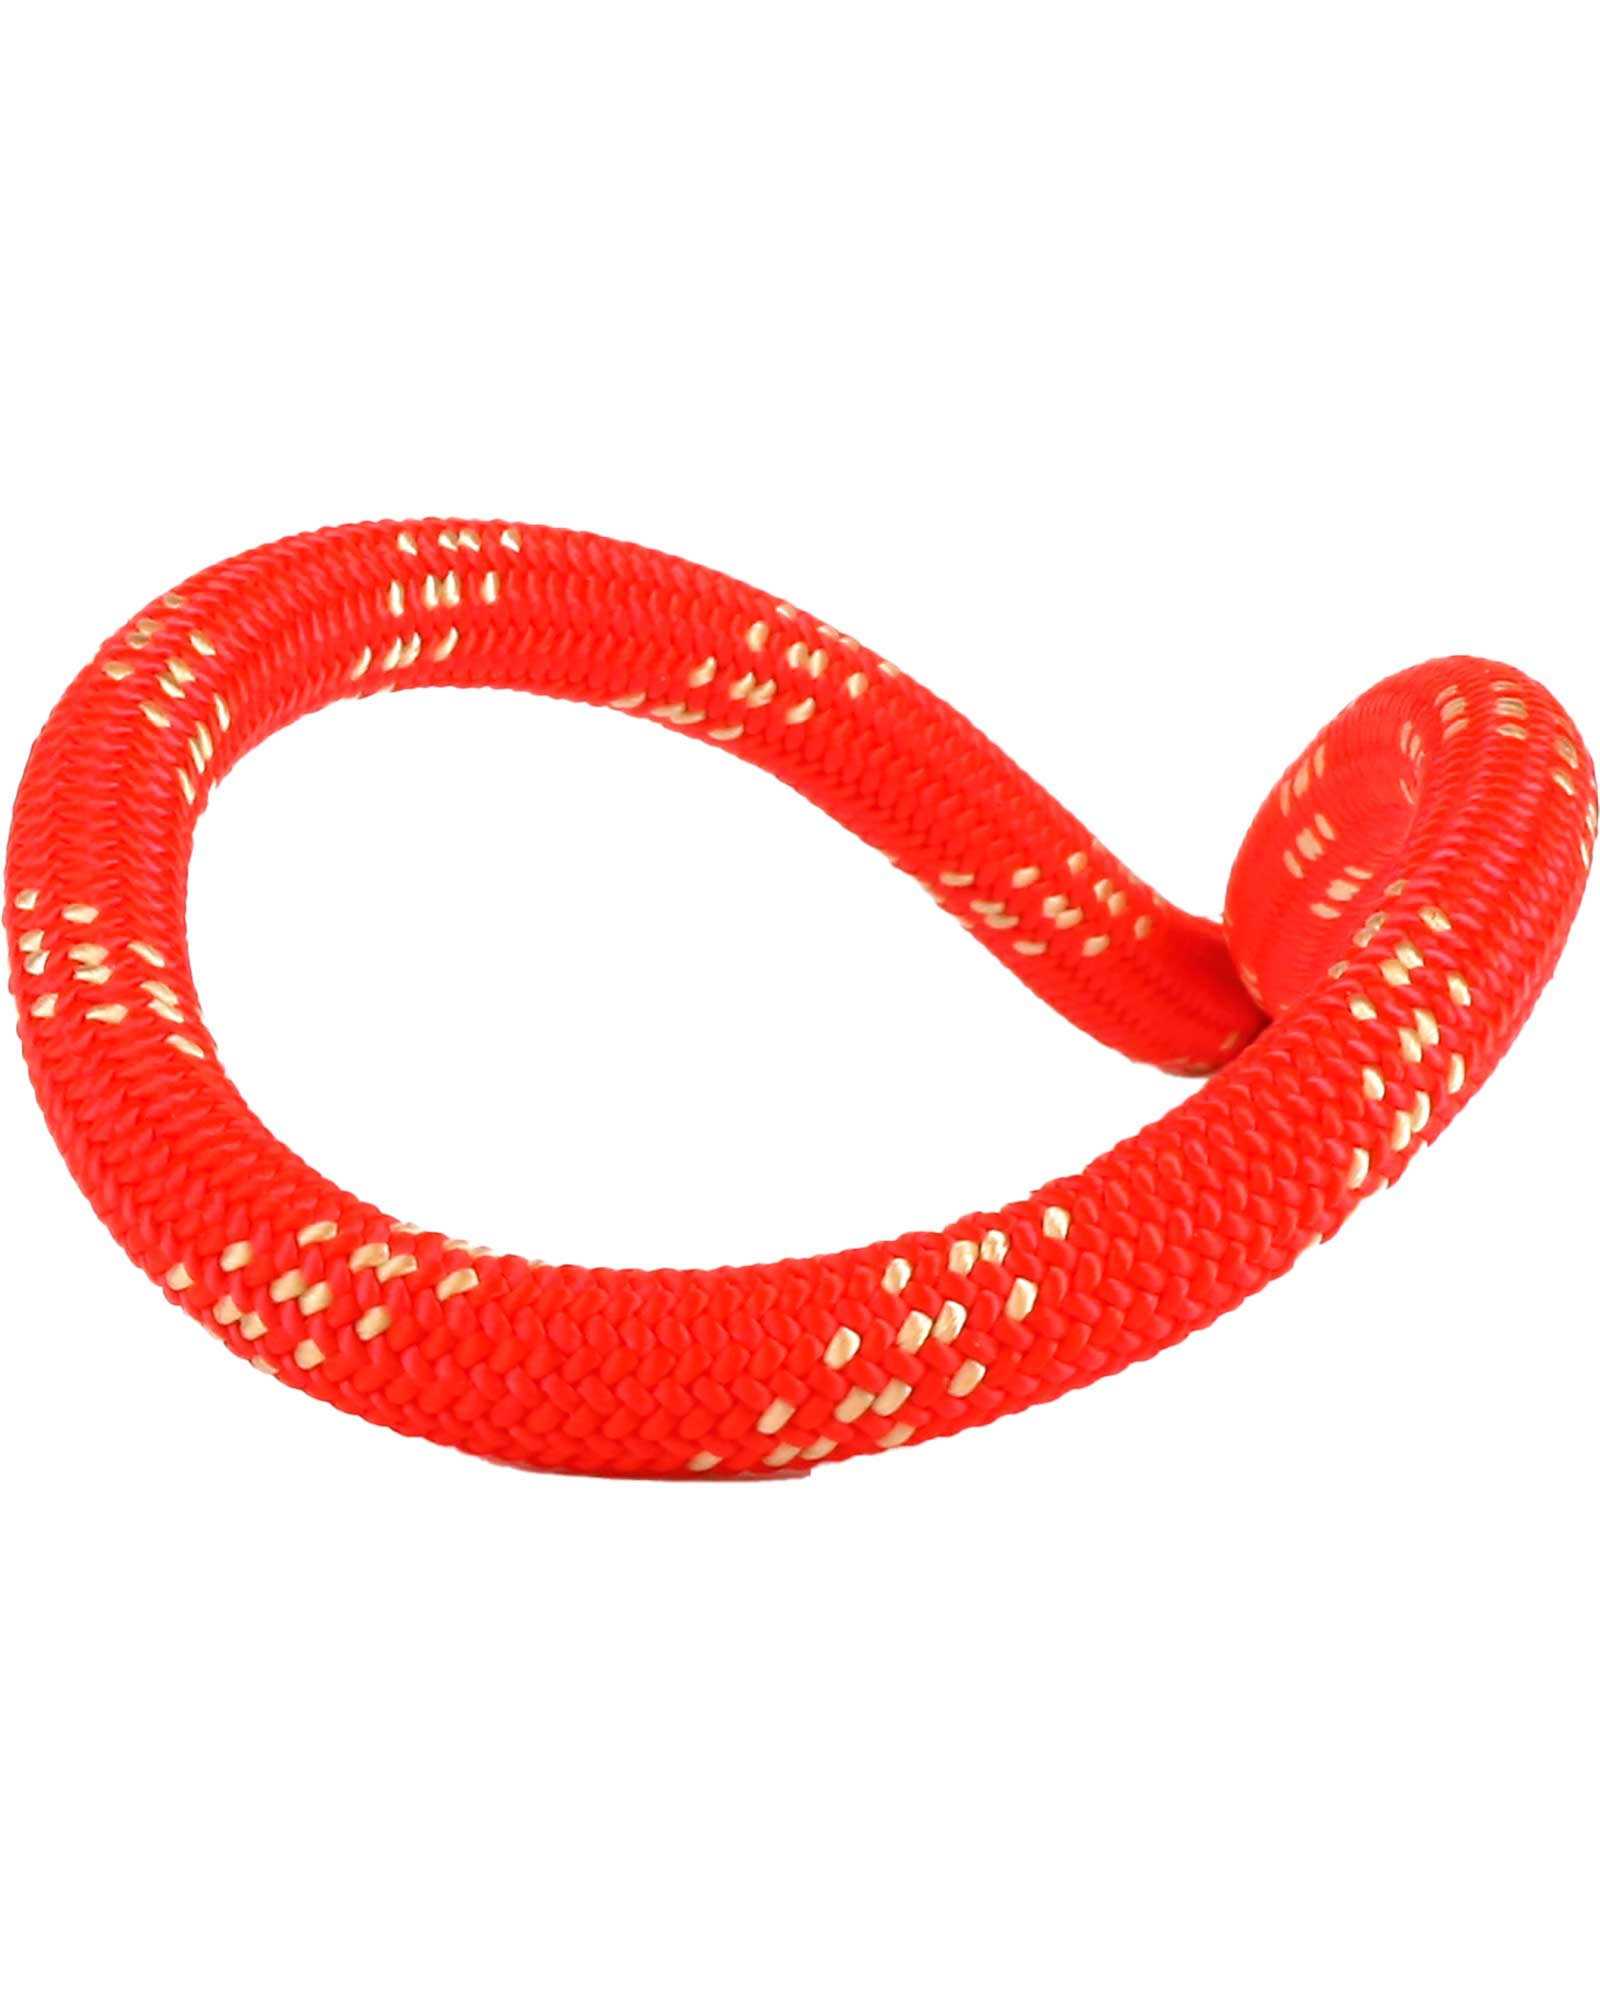 Edelweiss Oxygen Supereverdry 8.2mm x 60m Rope - Red 60m